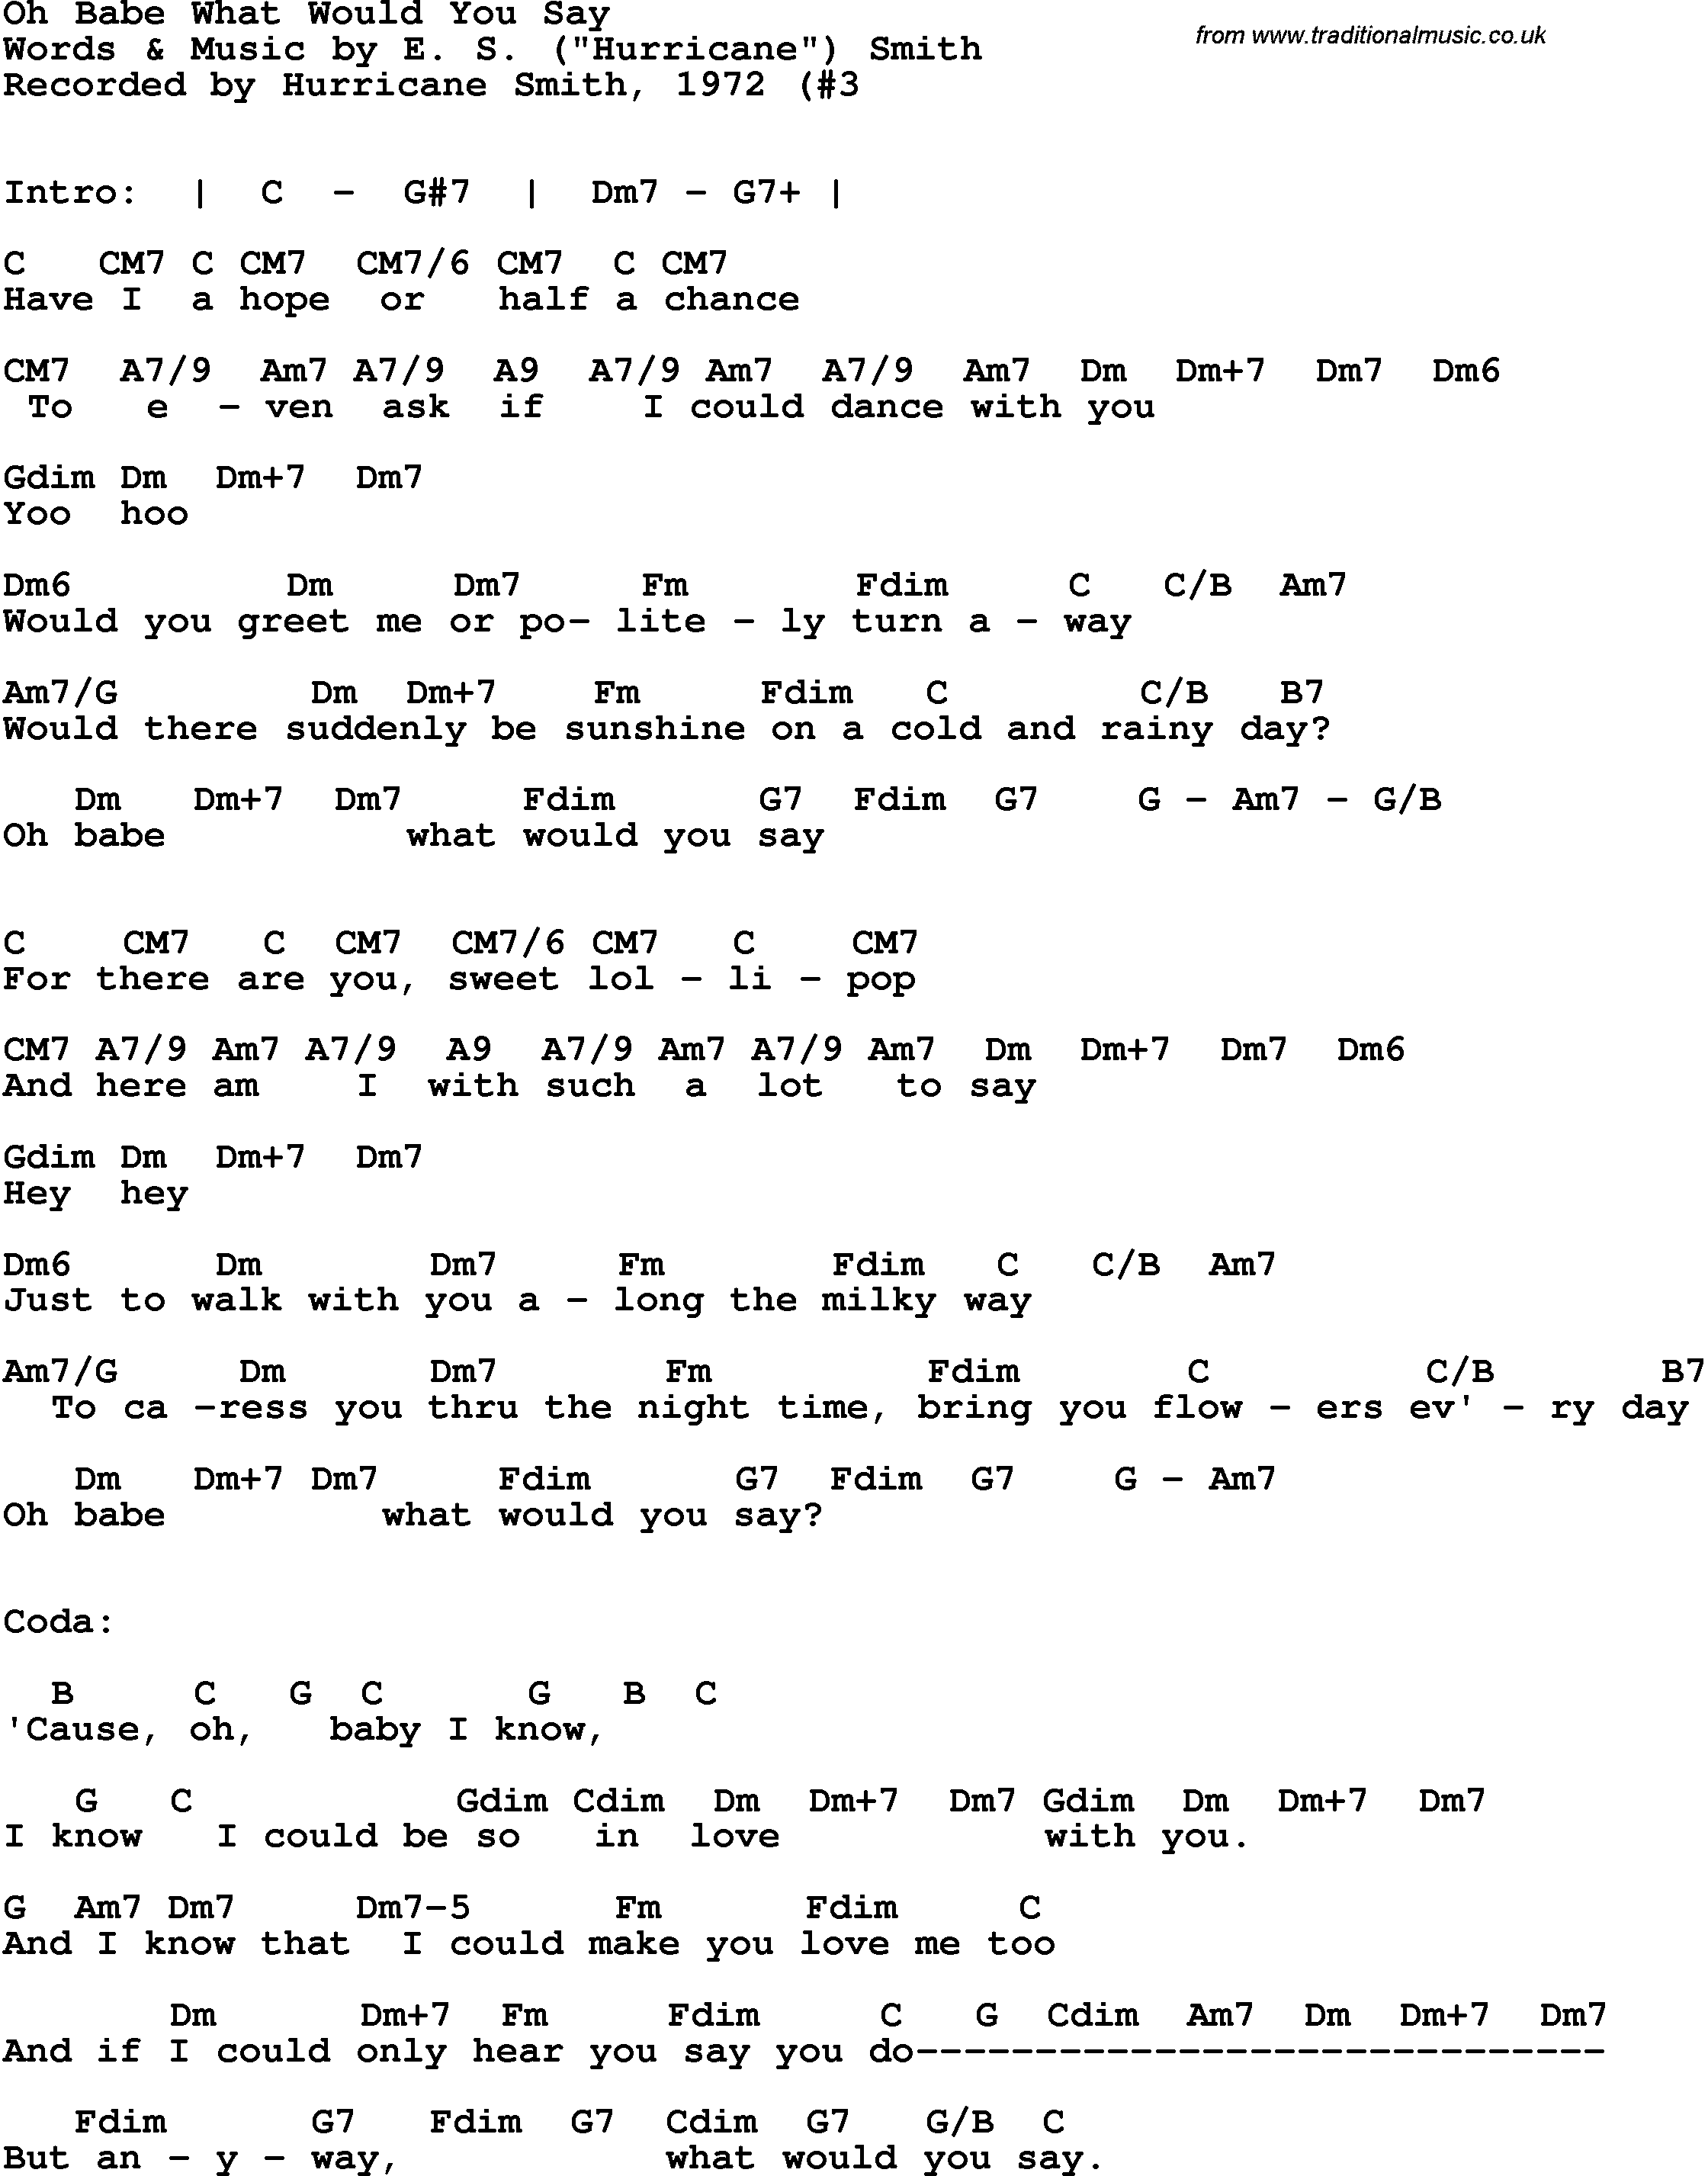 Song Lyrics with guitar chords for Oh Babe What Would You Say - Hurricane Smith, 1973